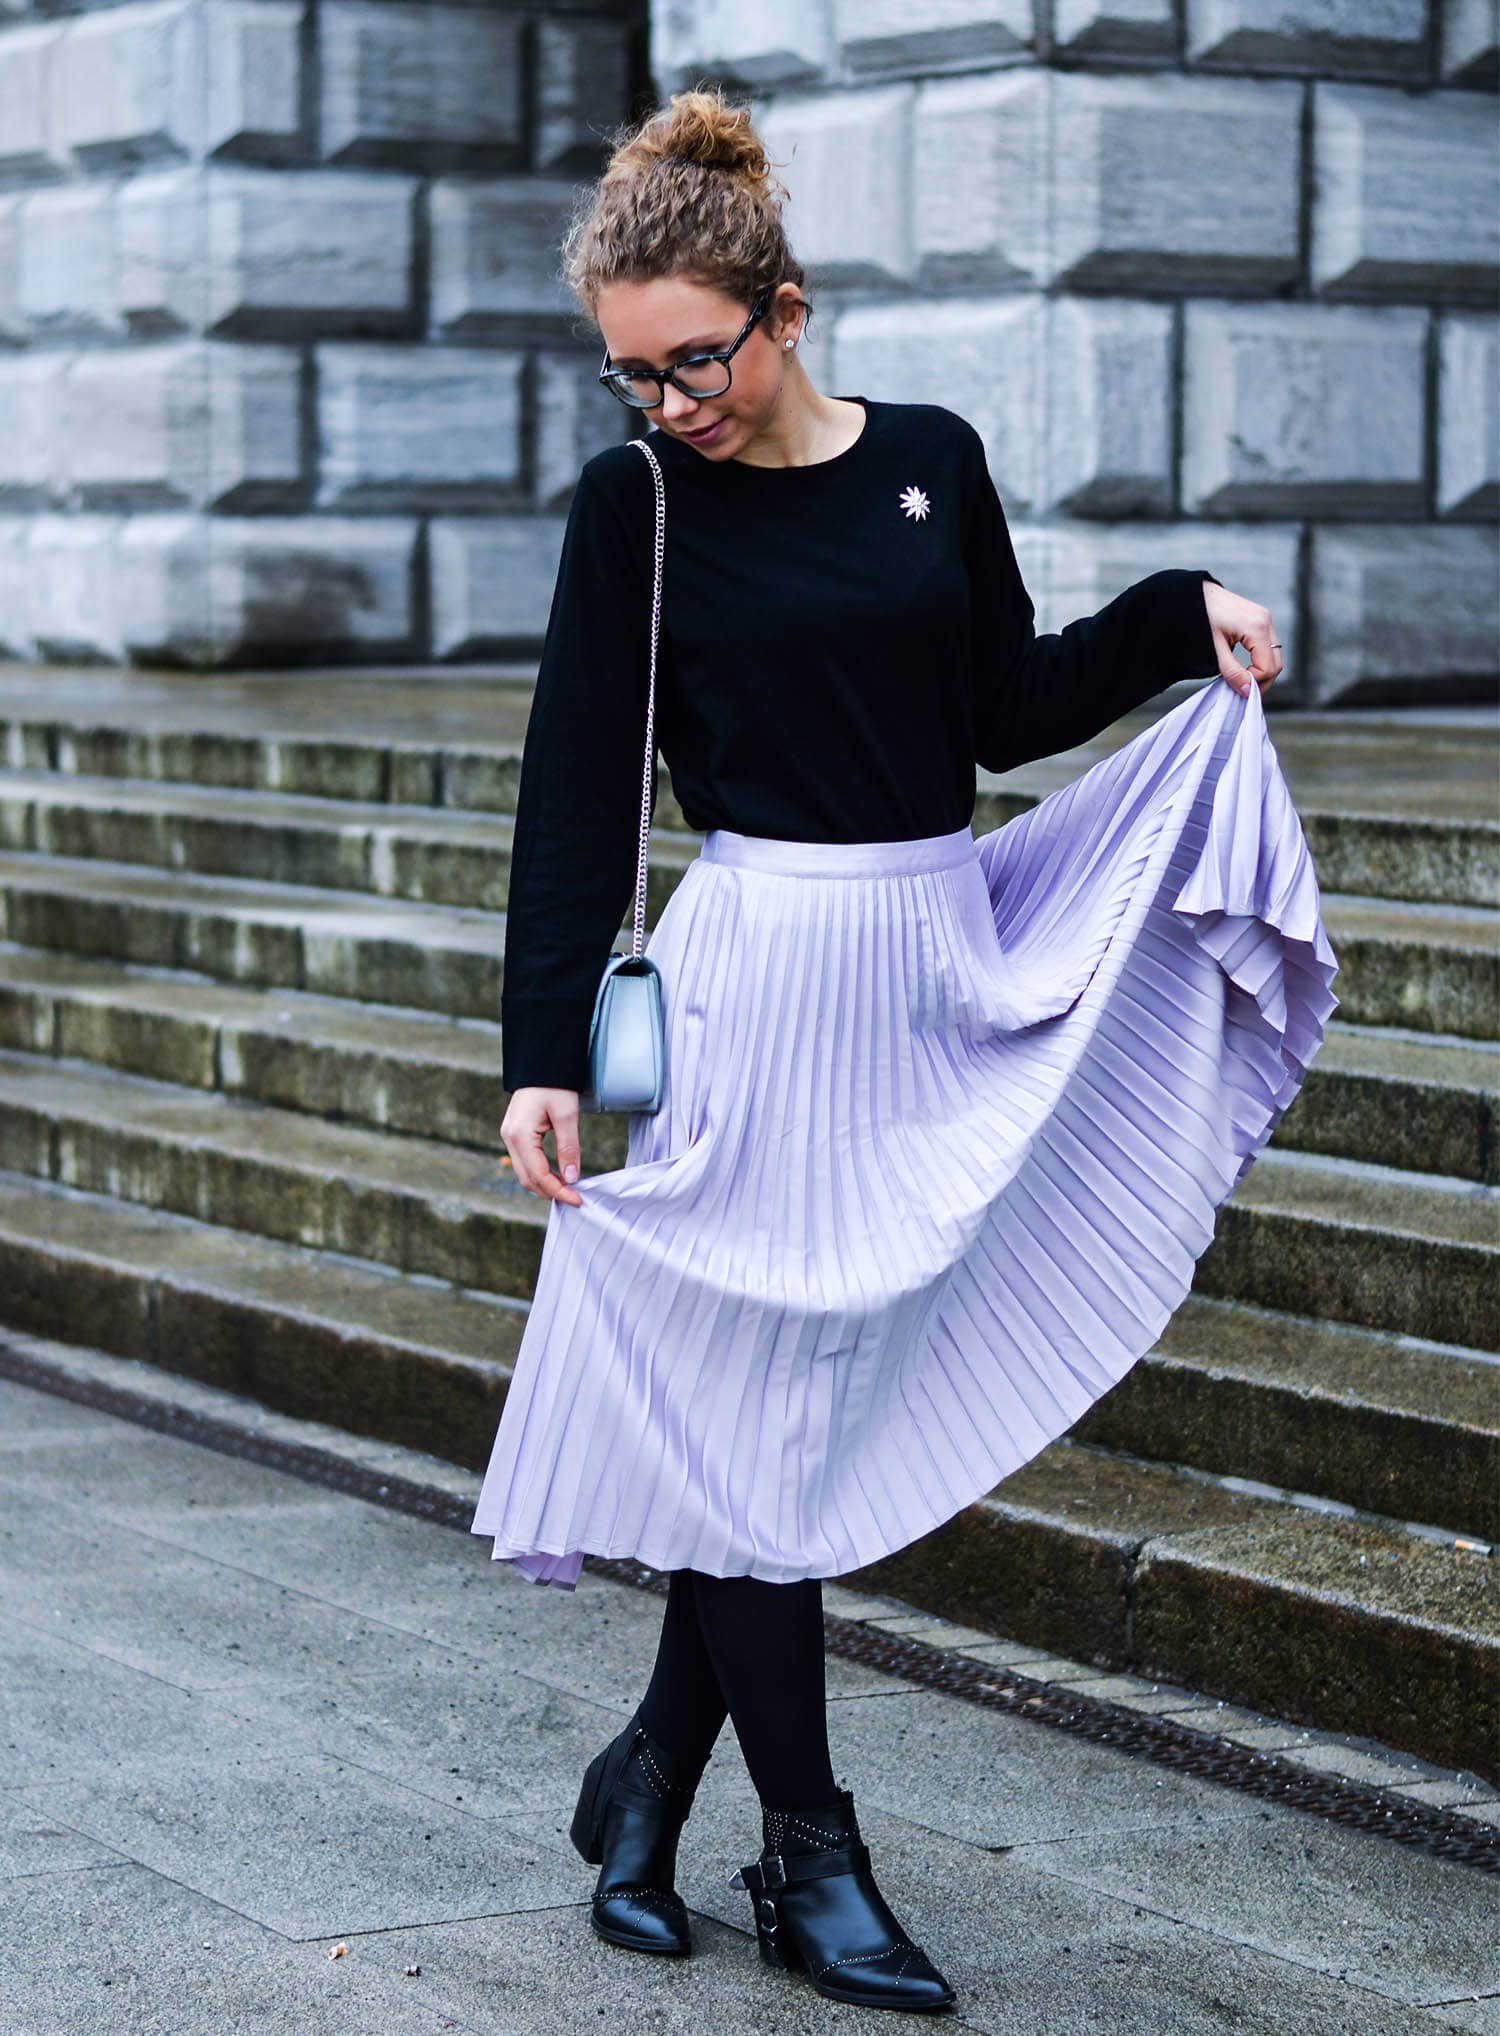 Kationette-Fashionblog-nrw-Engagement-Outfit-Metallic-Pleated-Skirt-Knit-Chanel-Brooch